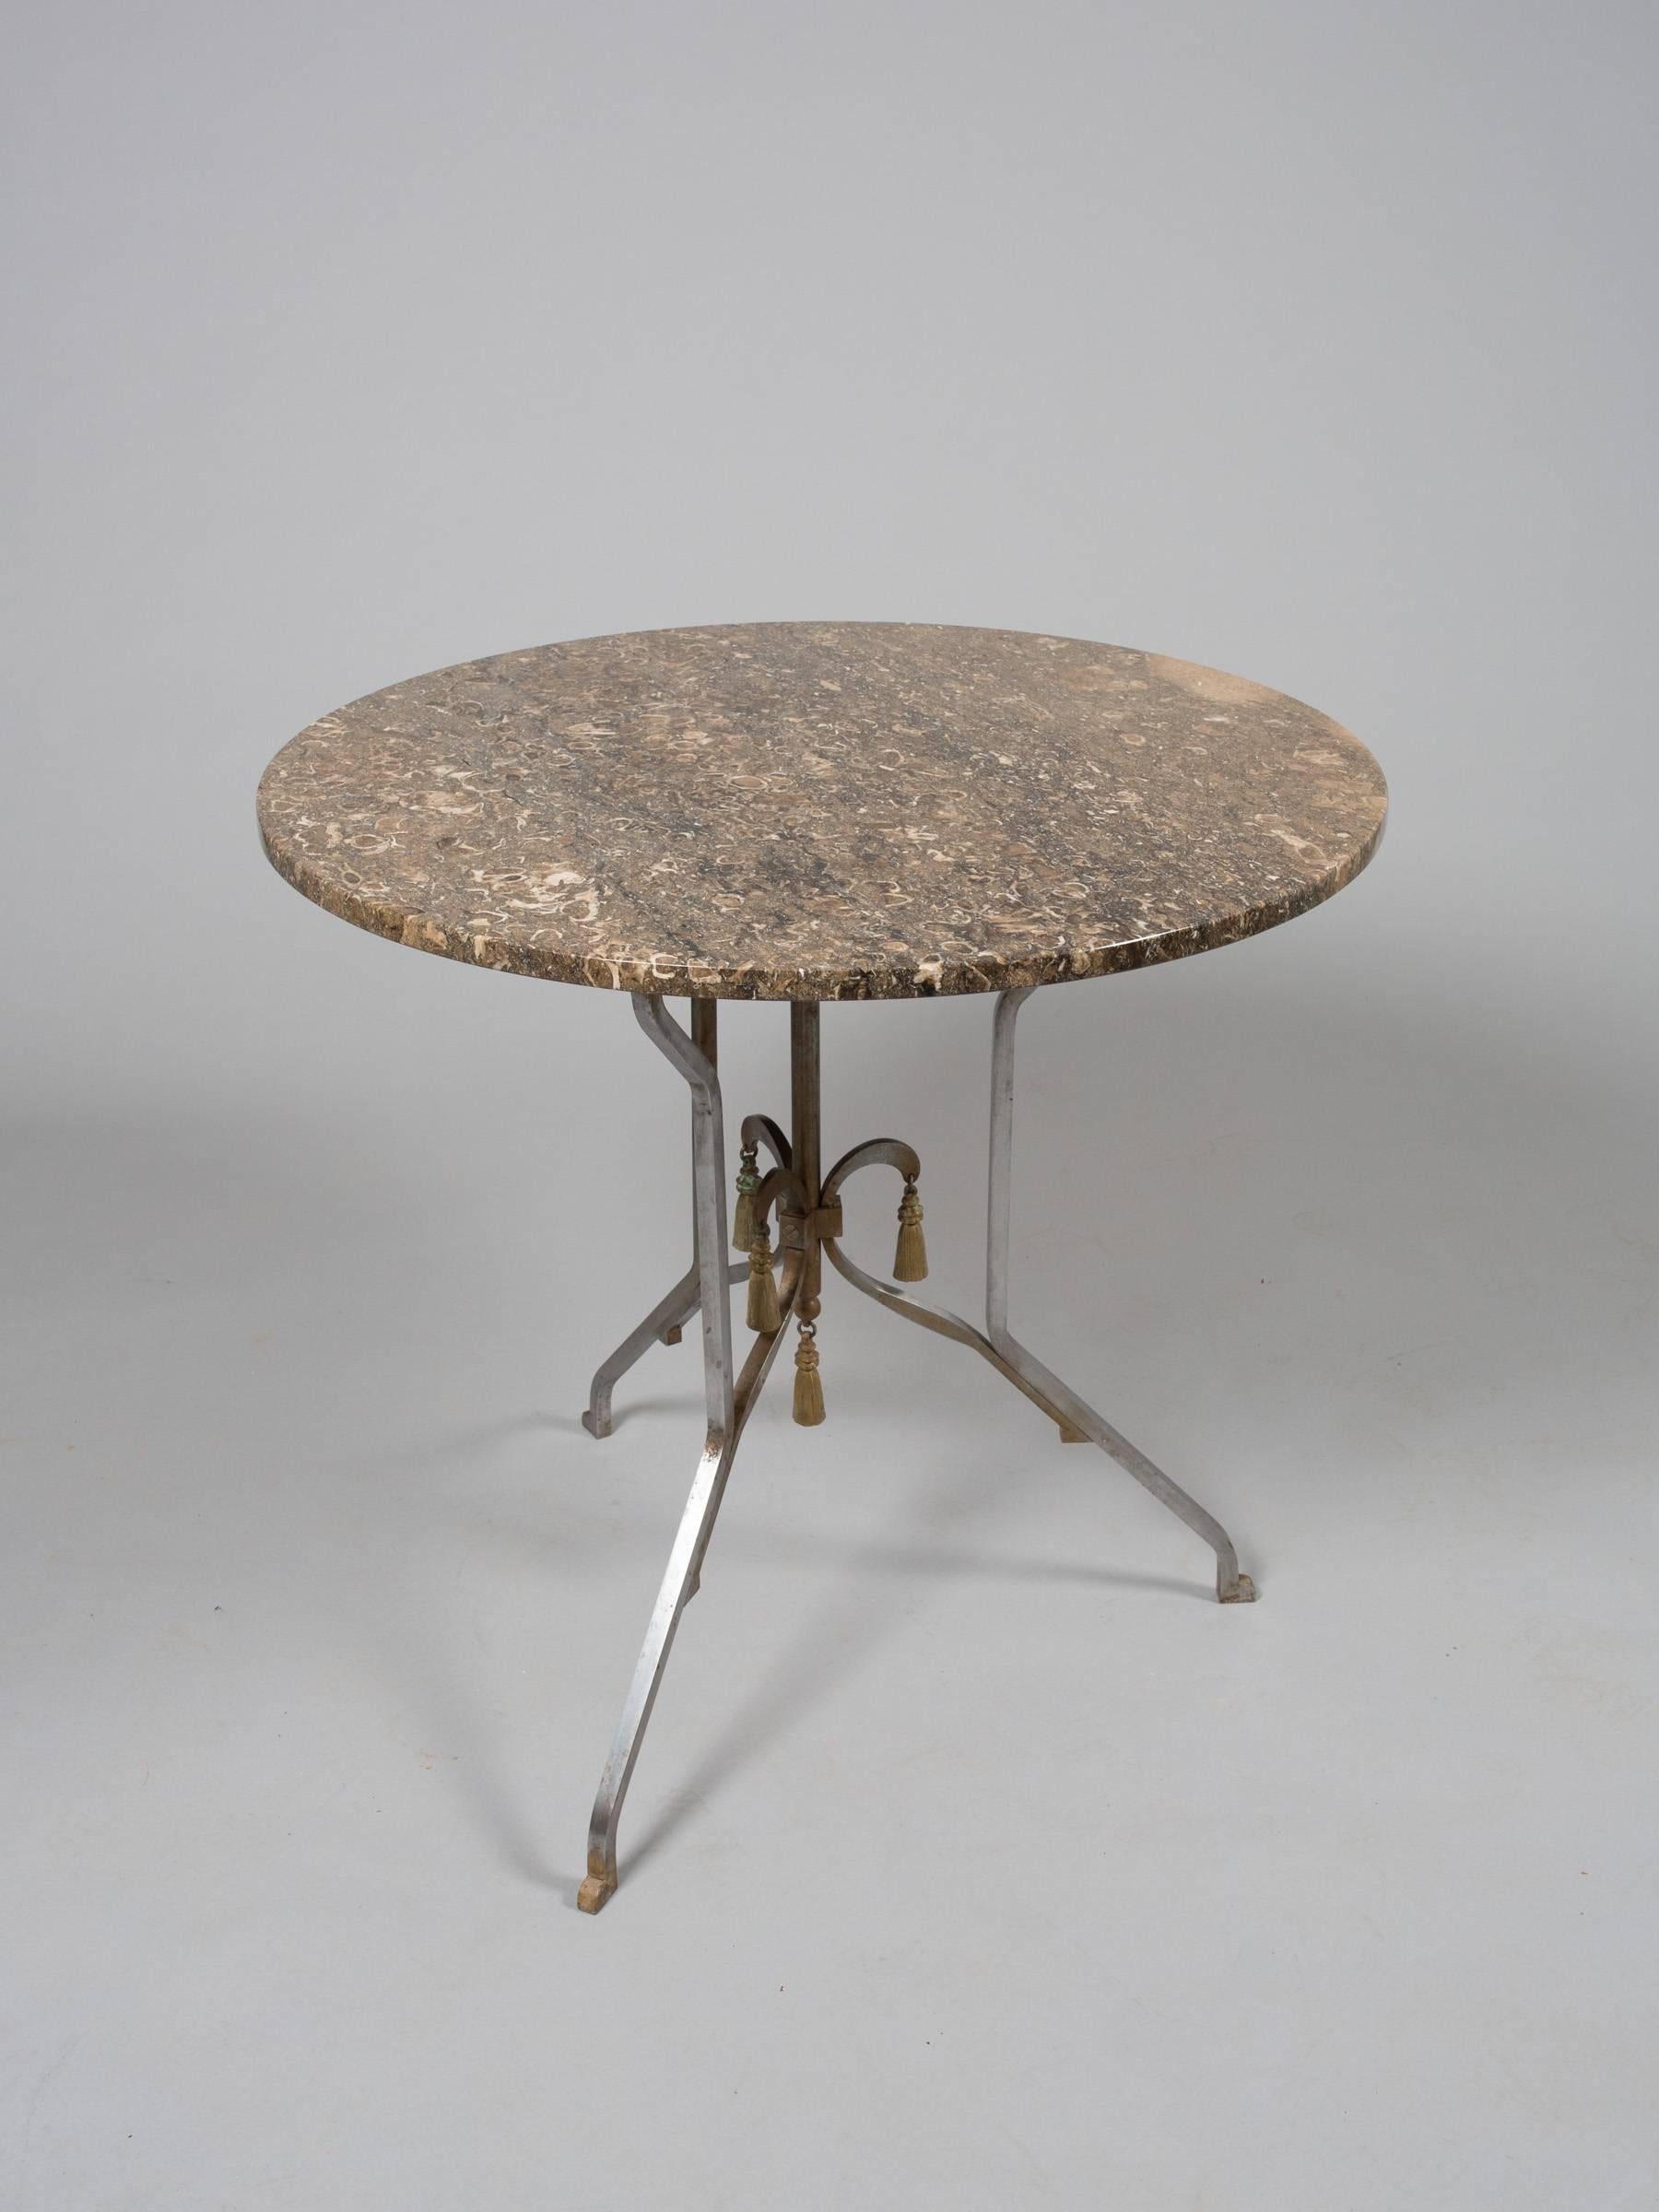 Elegant round steel occasional table with gold accents and variegated brown marble top. Attributed to Jansen.